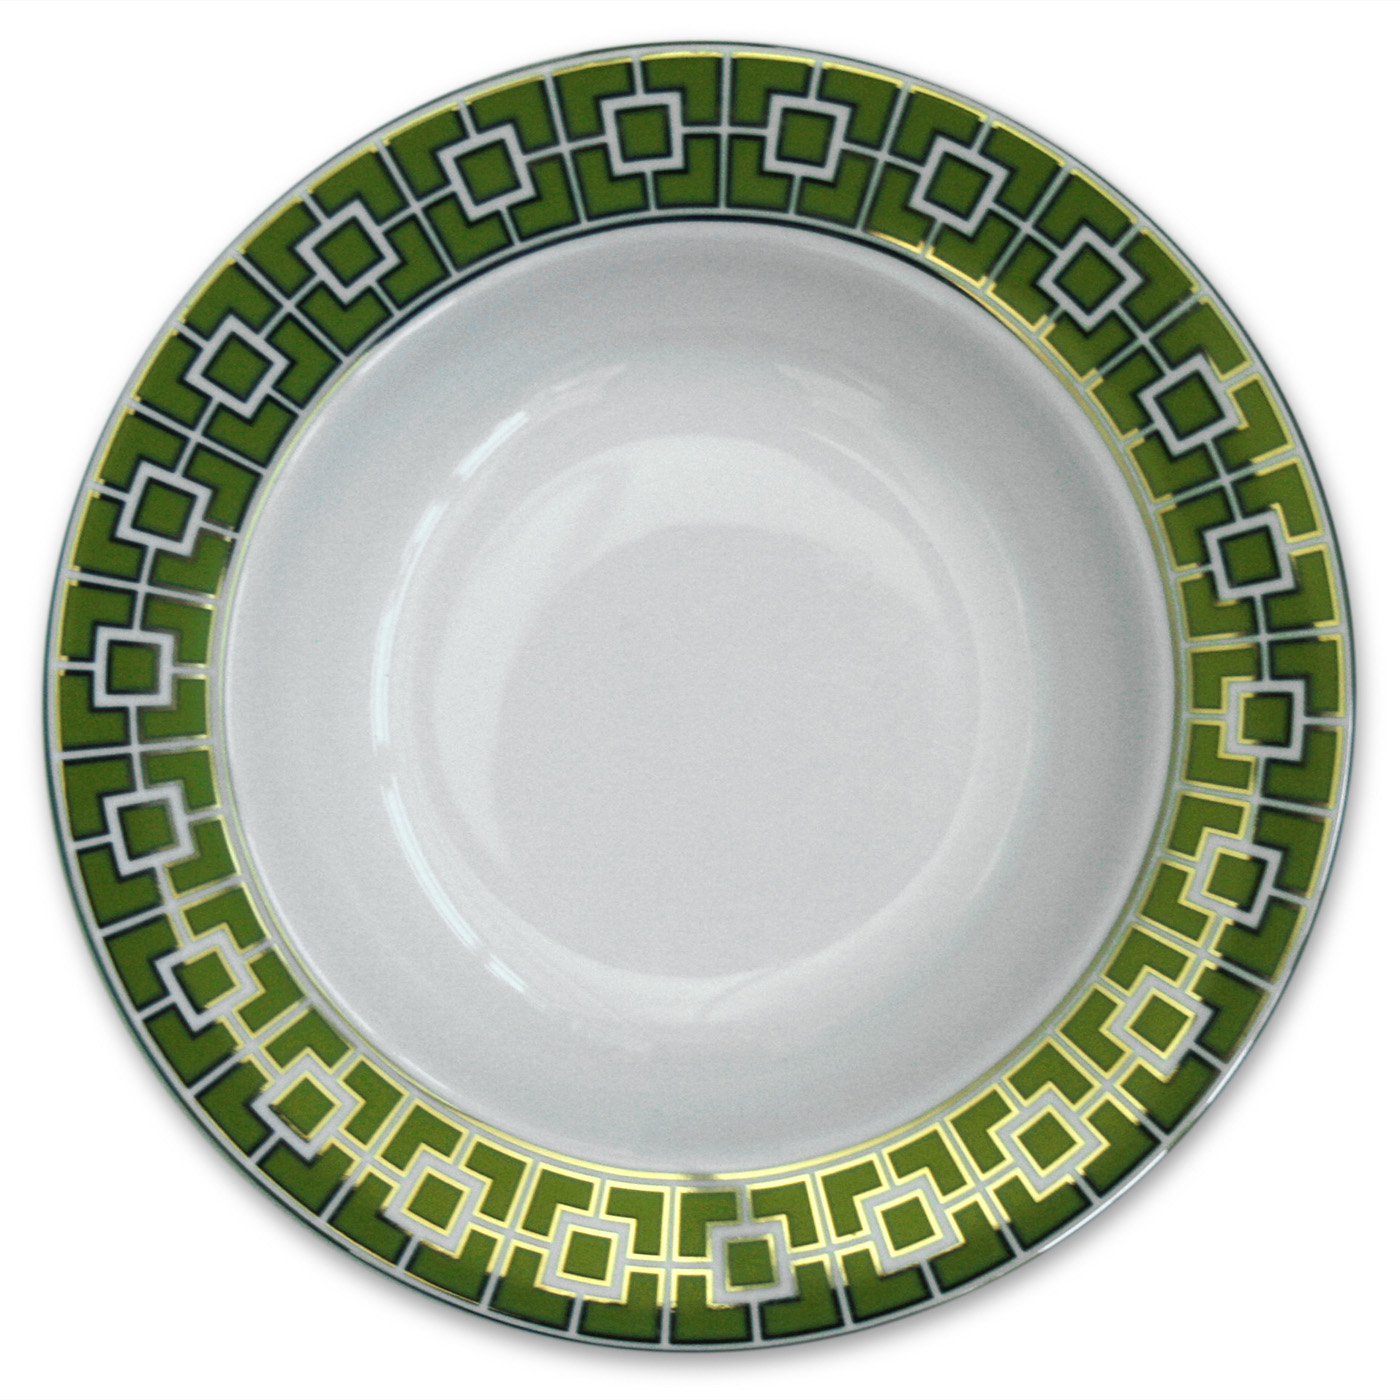 Another notion of the Nixon Bowl - part of an original contemporary china pattern by designer Jonathan Adler.